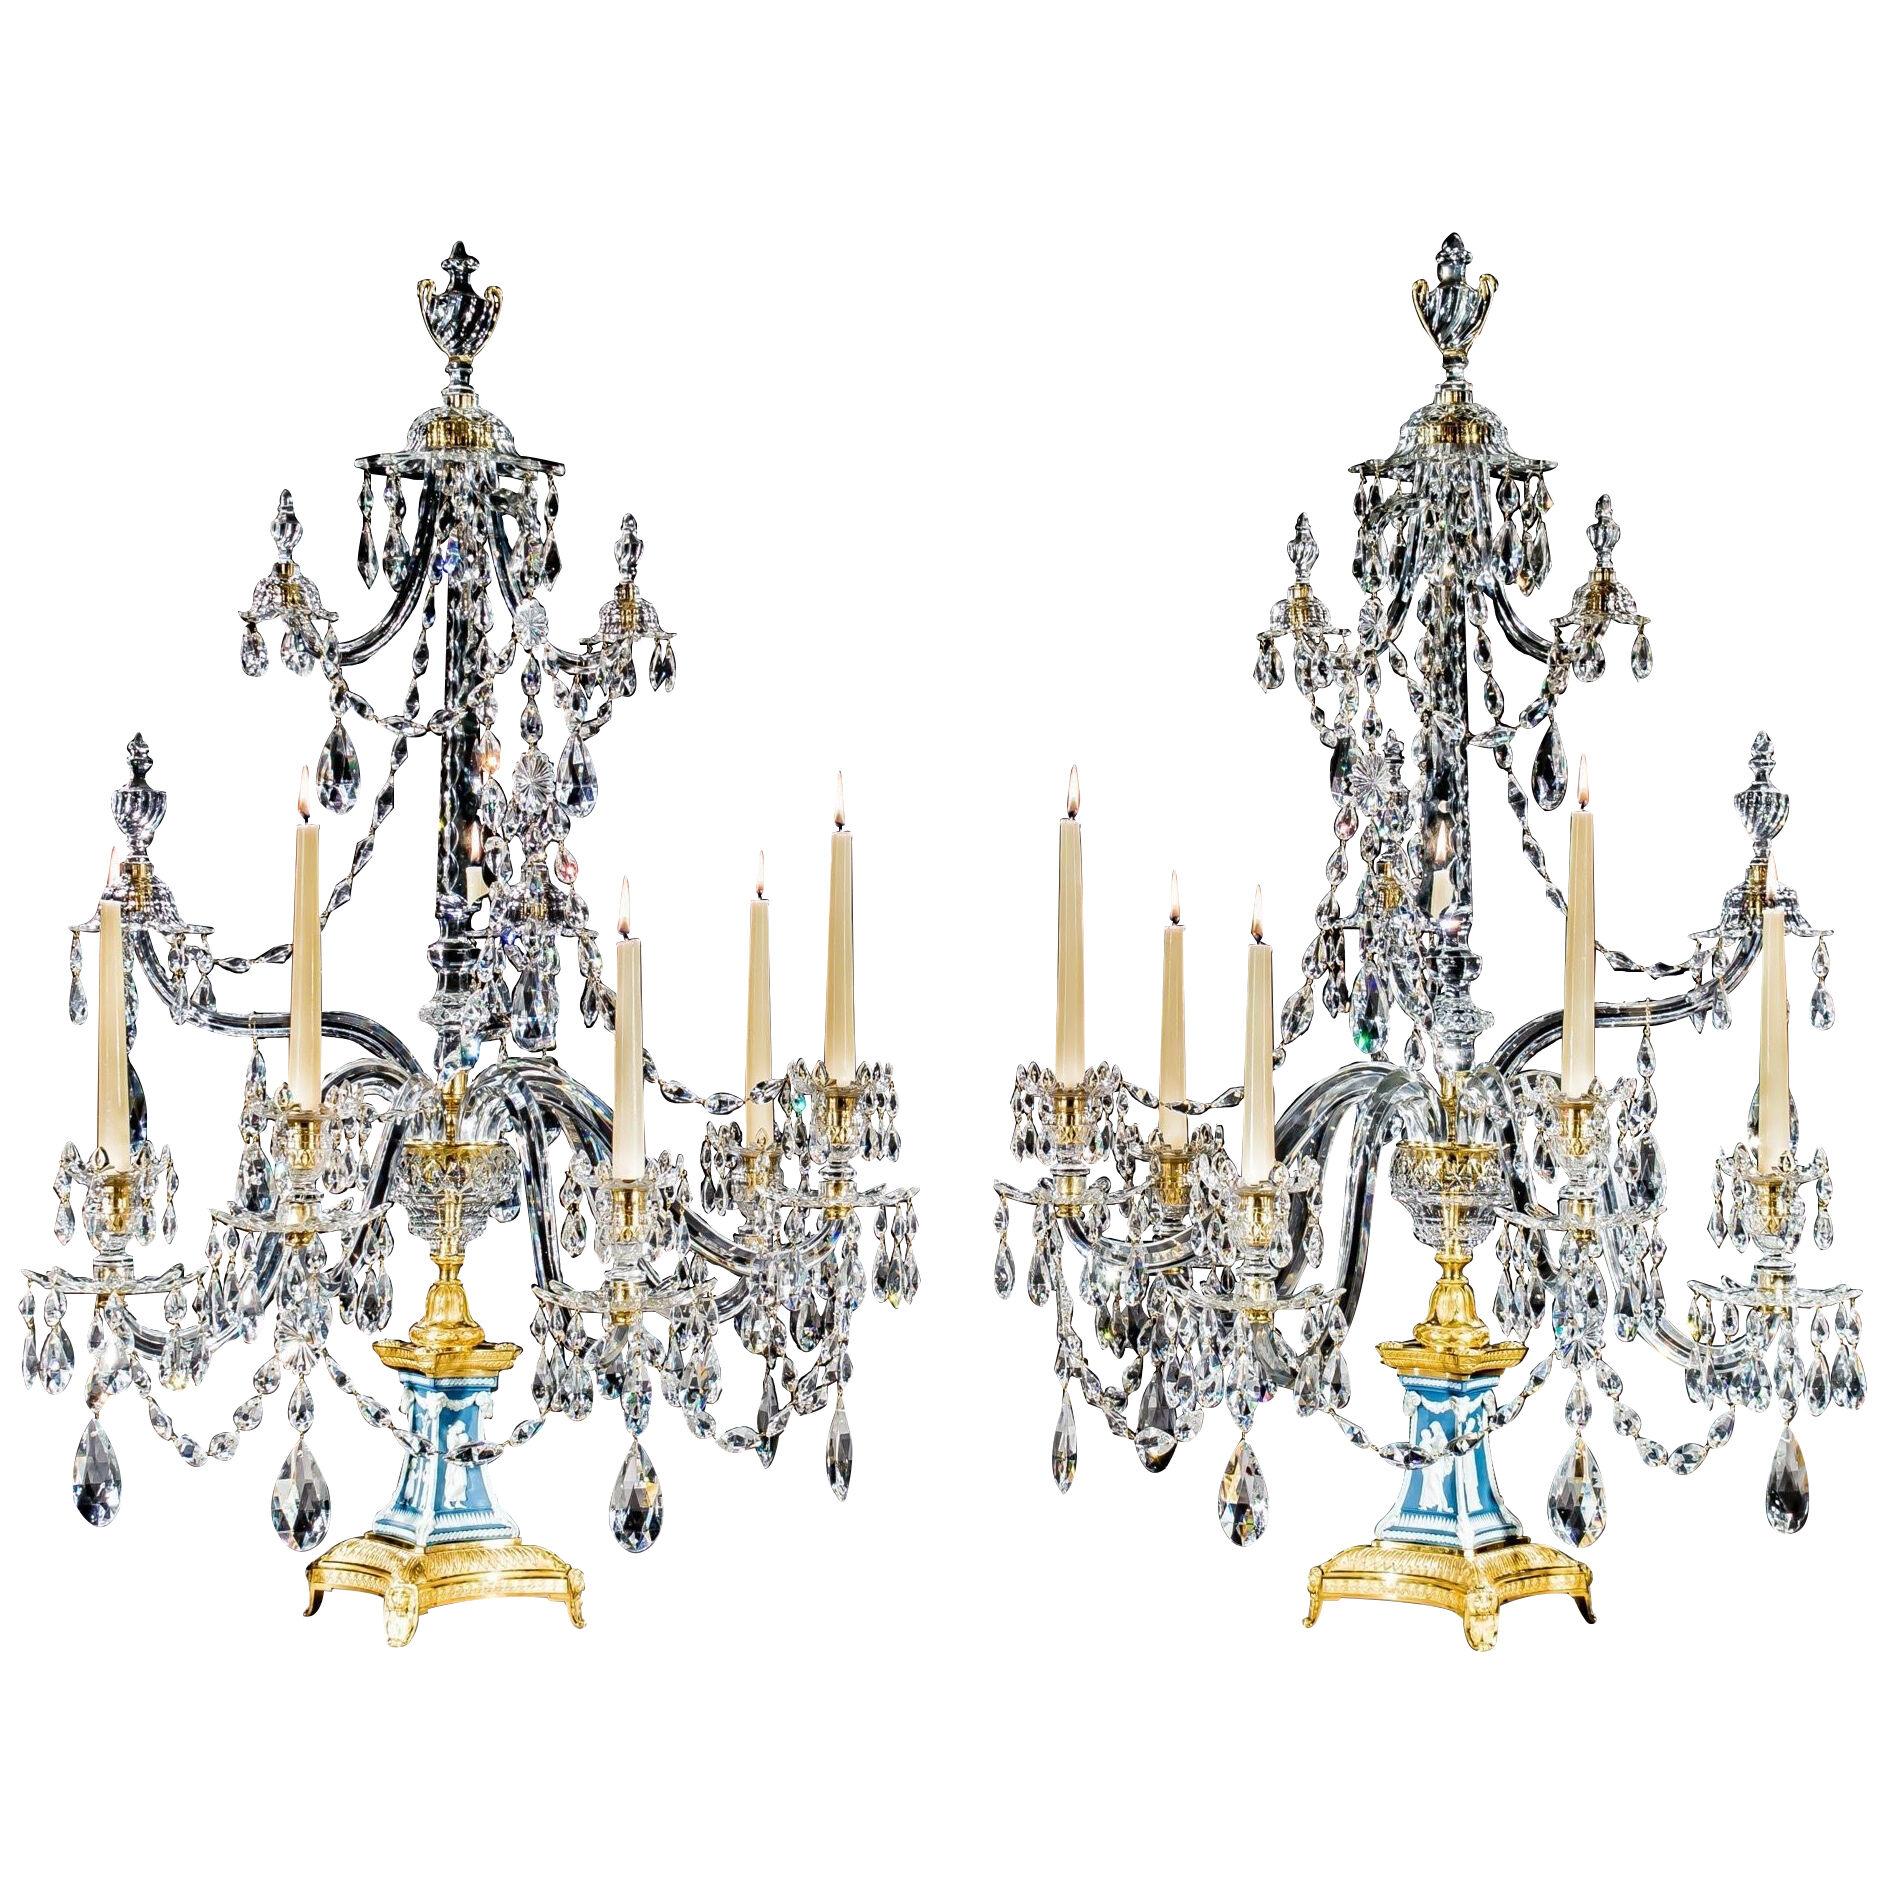 EXCEPTIONAL PAIR OF GEORGE III WEDGWOOD FIVE-LIGHT CANDELABRA BY WILLIAM PARKER